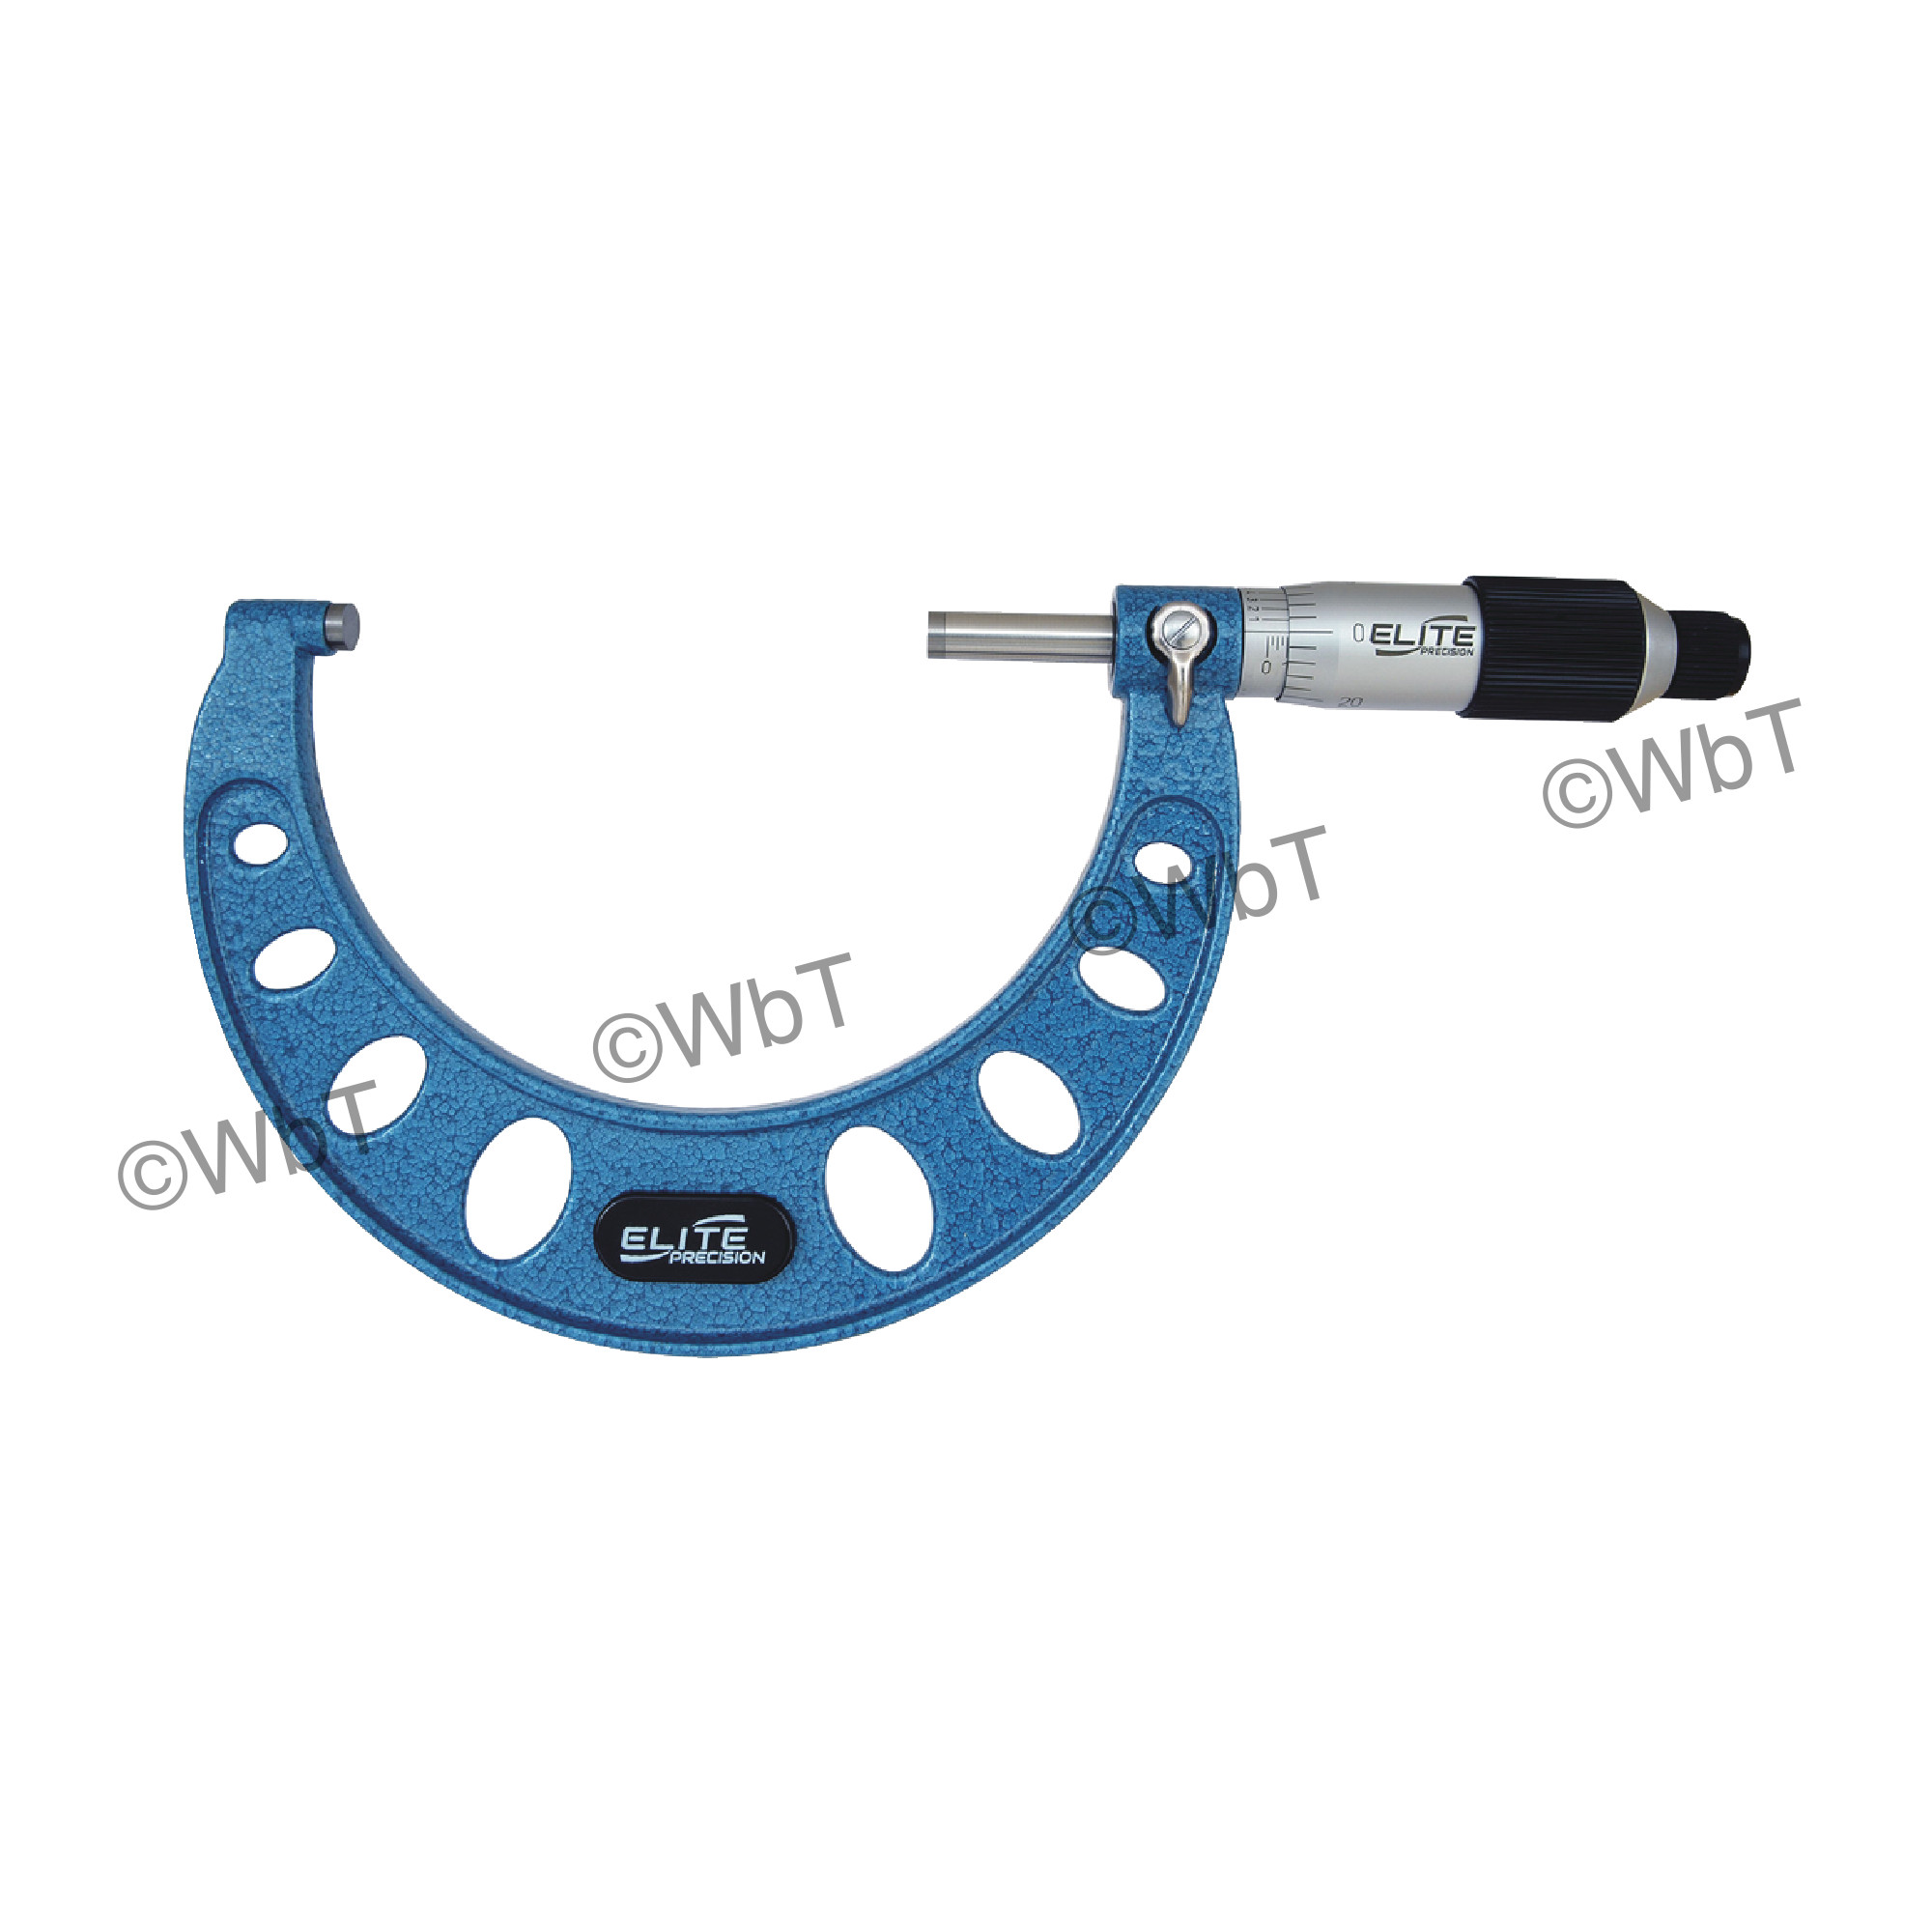 Certified Precision Outside Micrometer